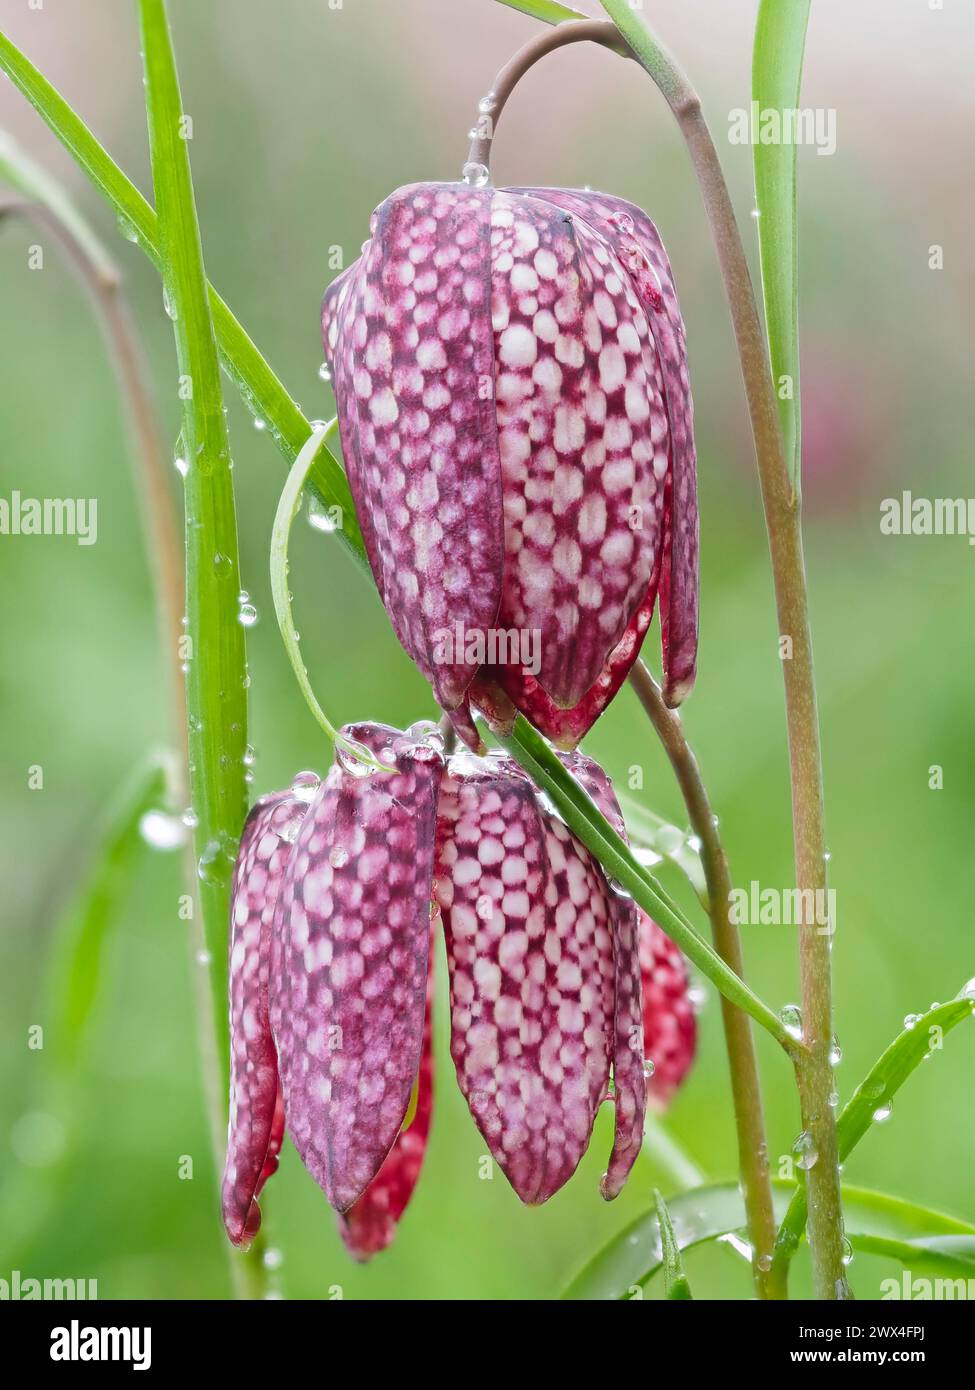 Tessellated checkerboard pattern on the petals of the spring flowering hardy bulb, Fritillaria meleagris Stock Photo